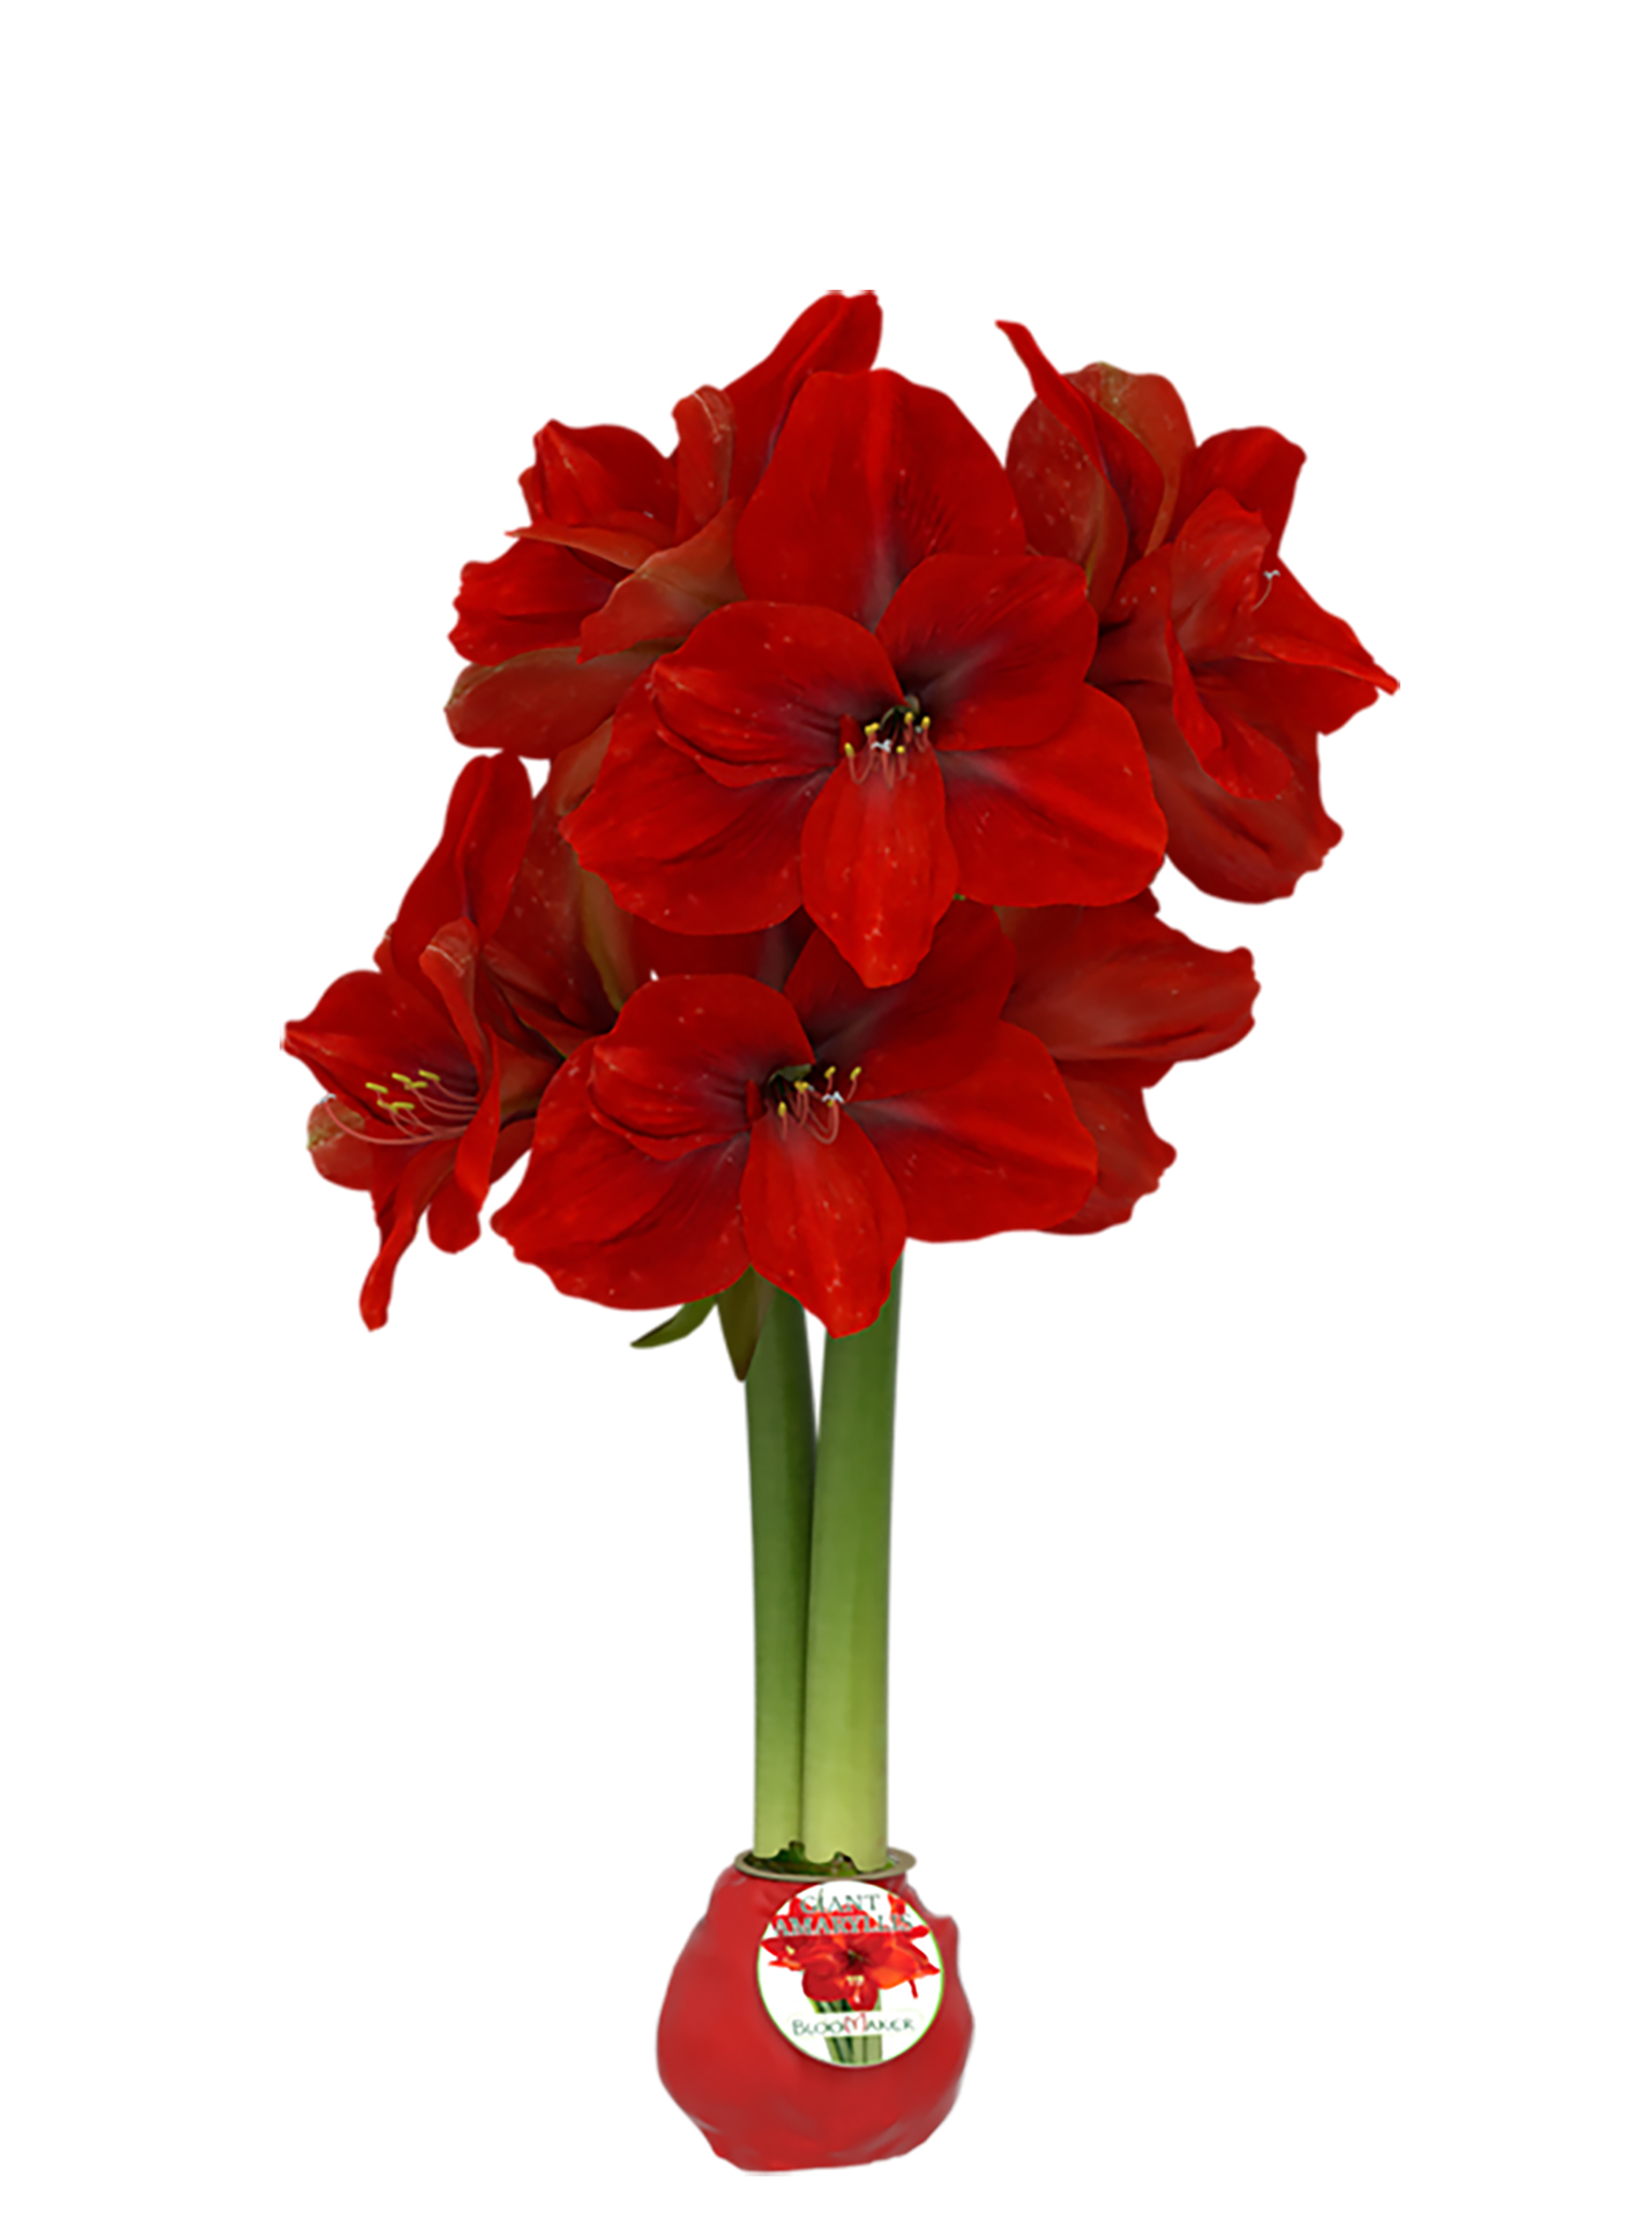 How To Care For Amaryllis Bulb In Wax Waxed Amaryllis » How do I care for my Waxed Amaryllis? – Bloomaker USA